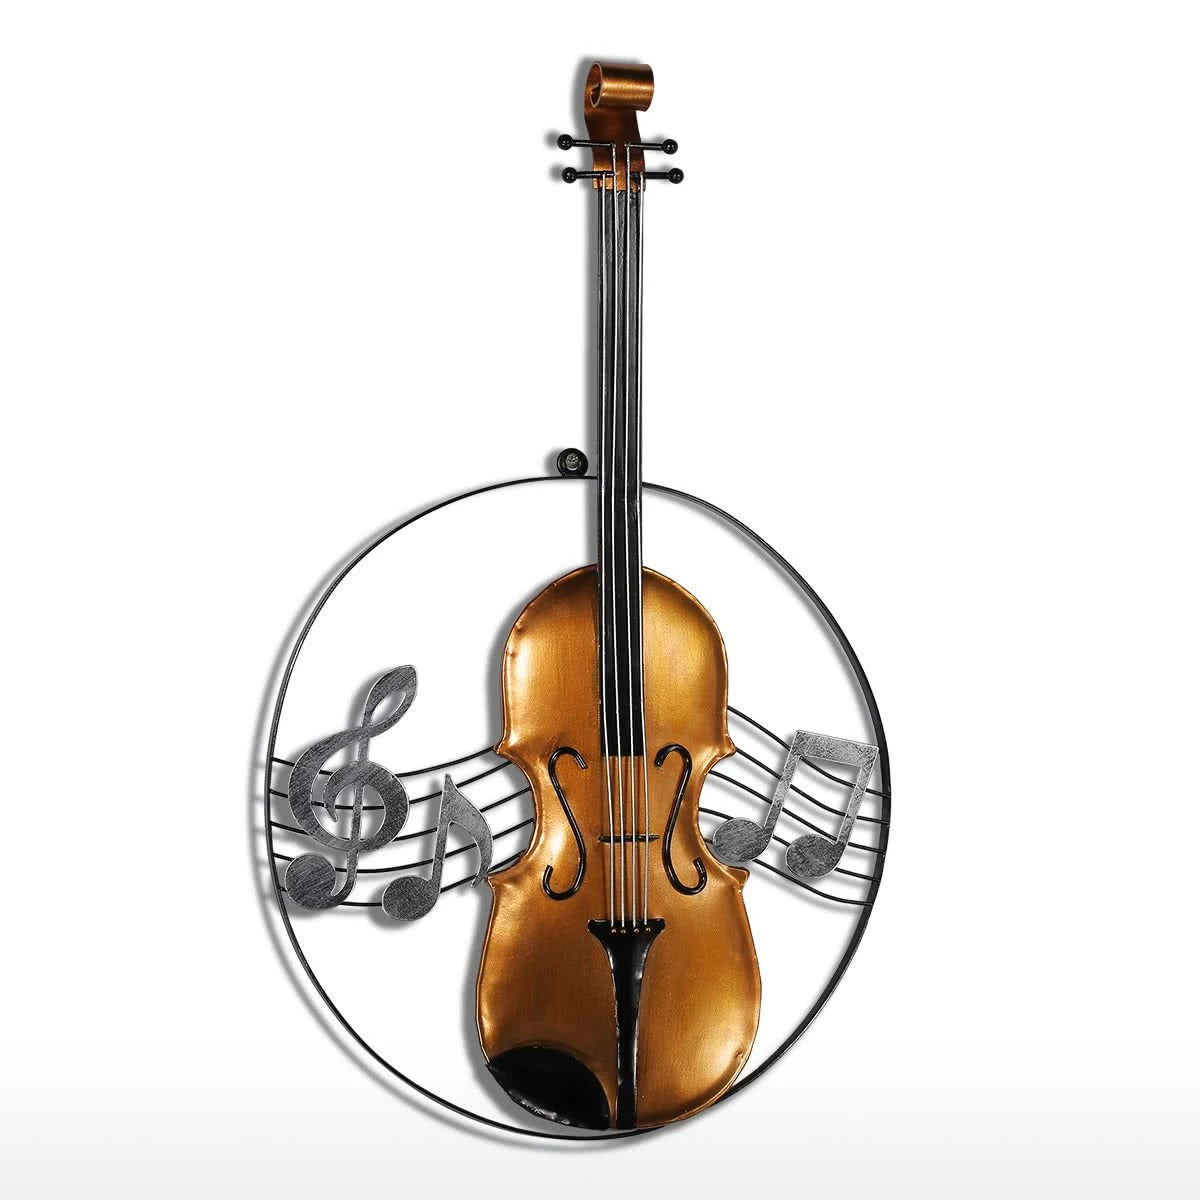 Musical Instrument Wall Art with Violin